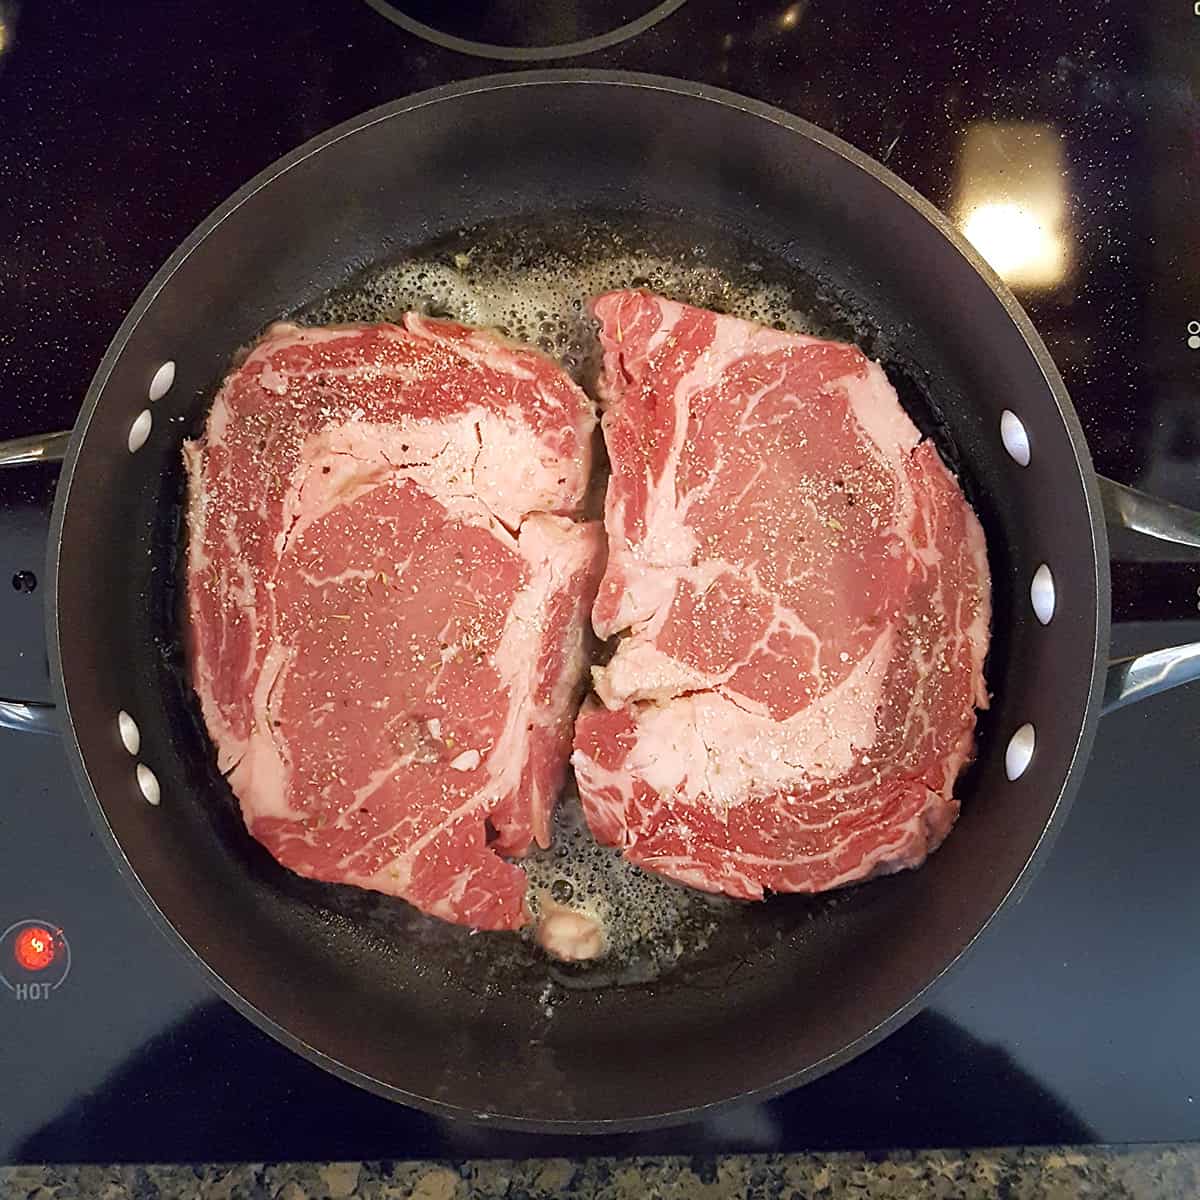 Two steaks in a skillet.